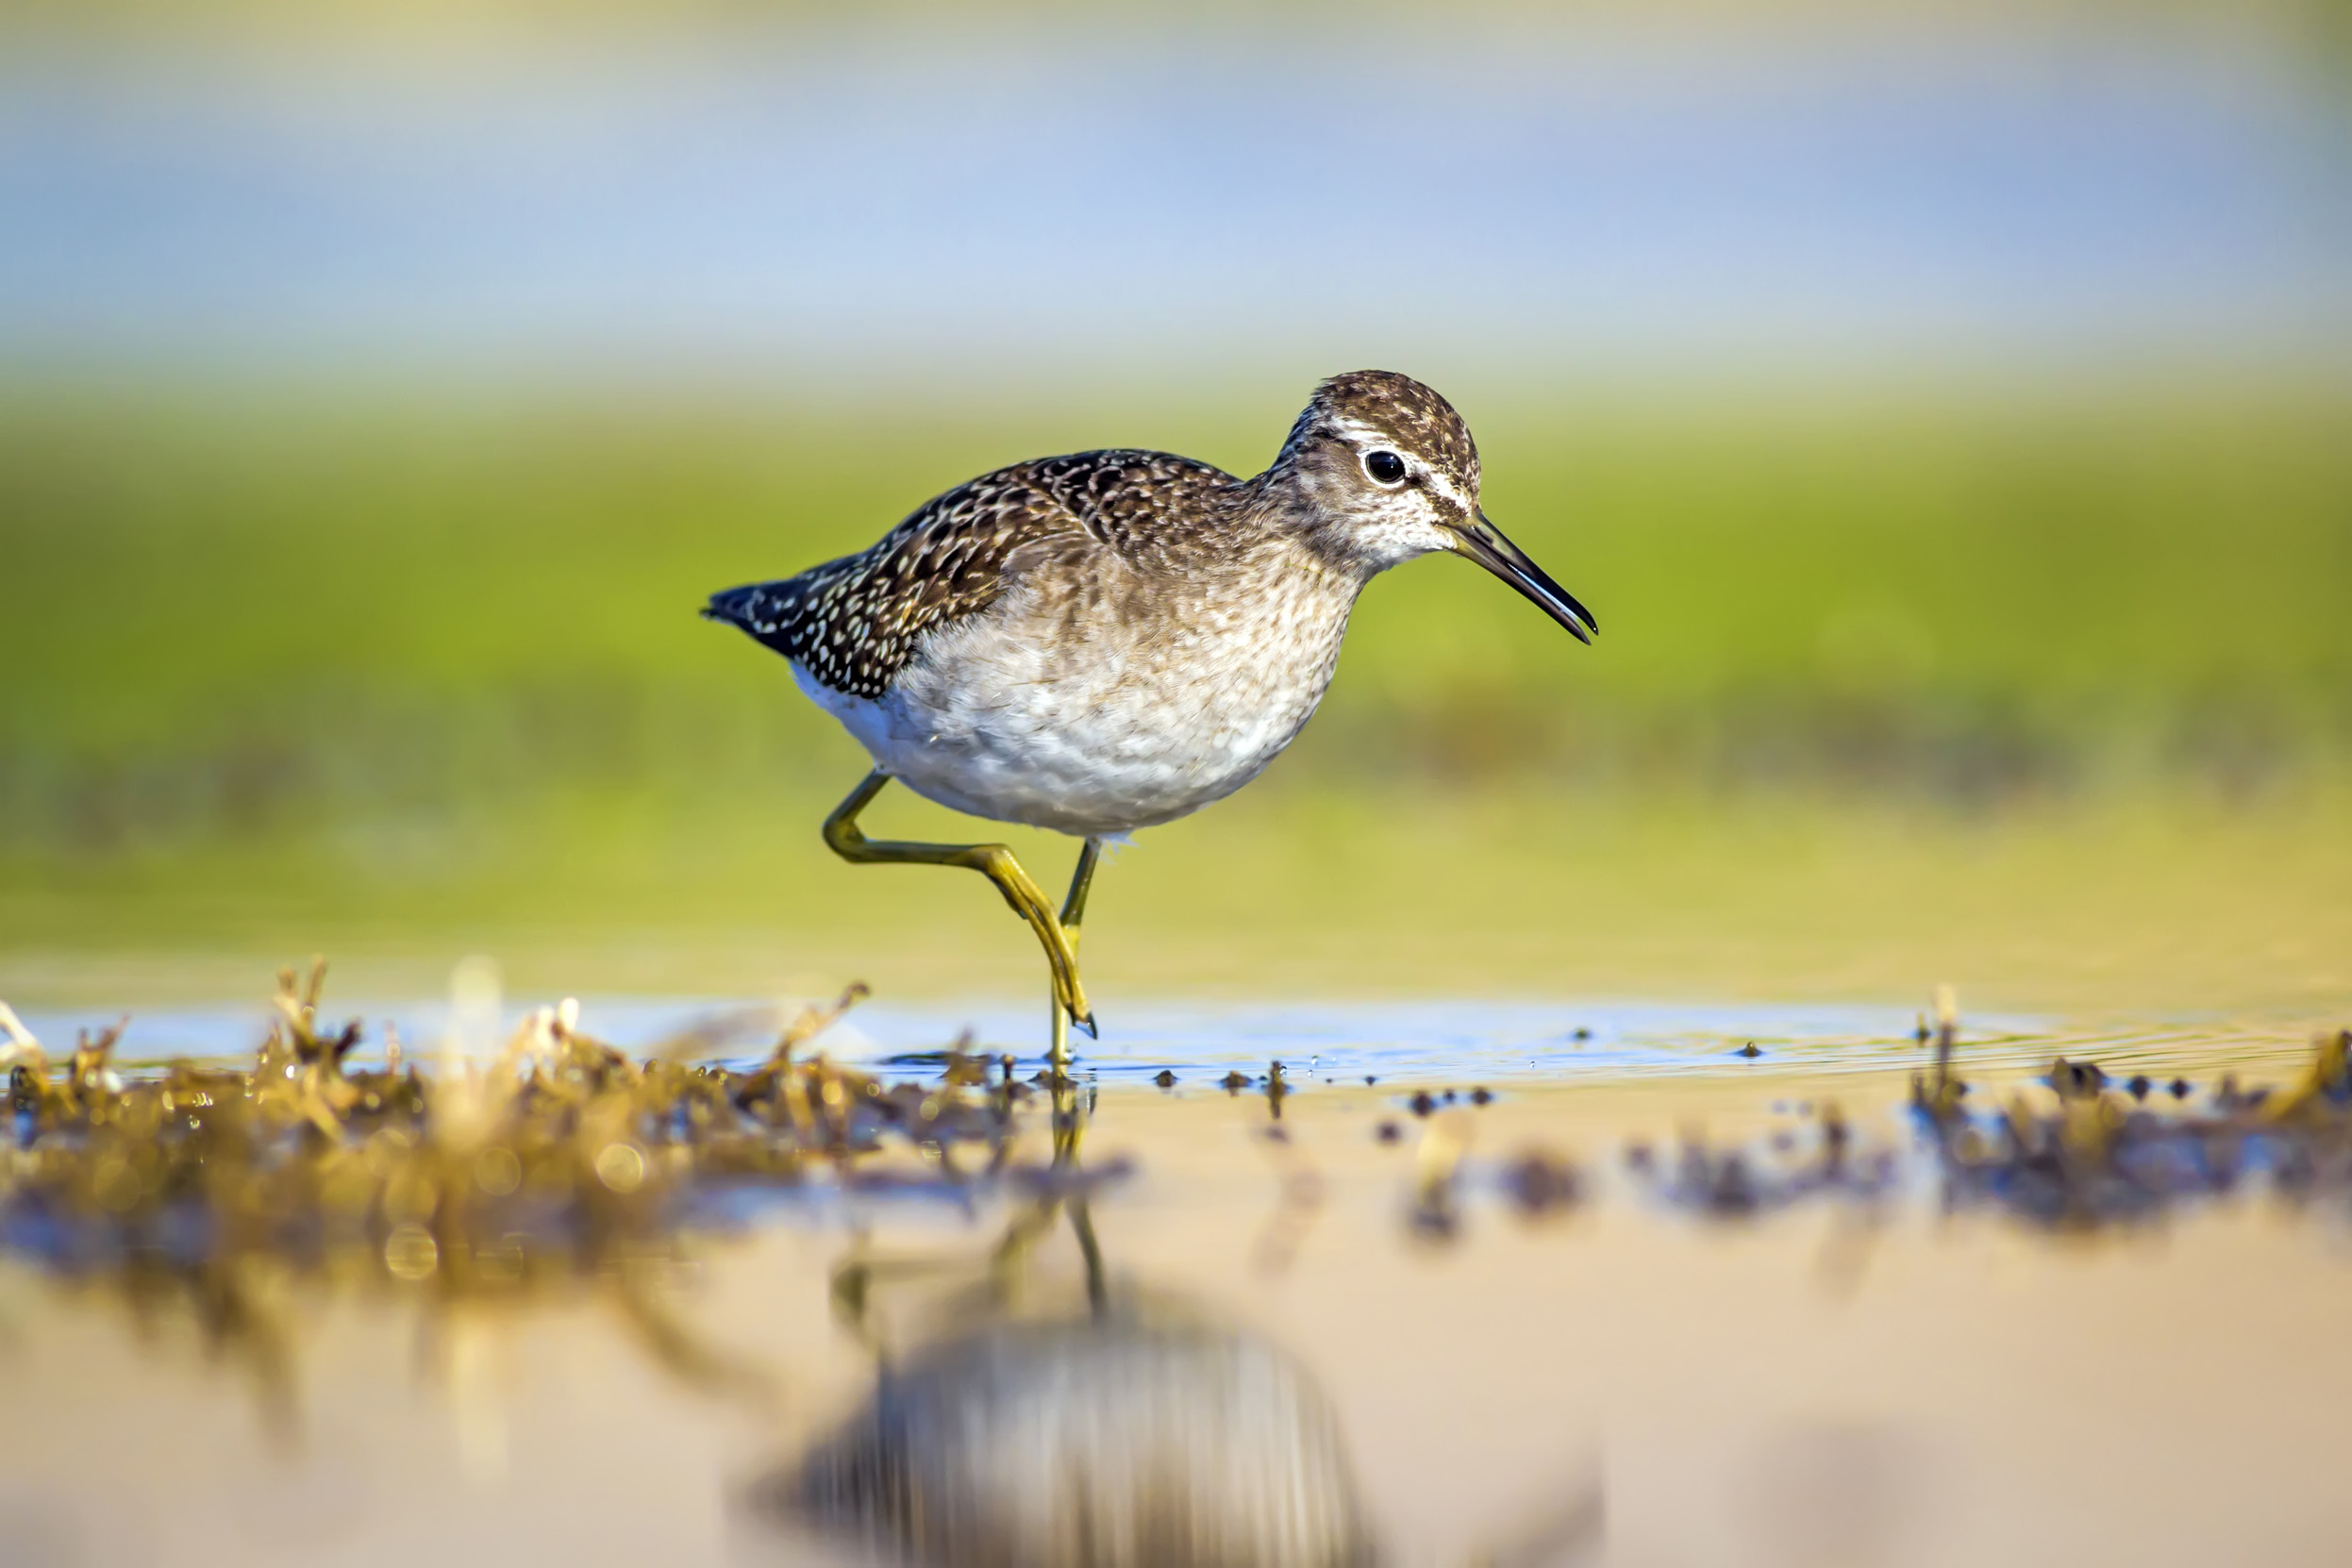 A lone Wood Sandpiper wading in the shallow waters of a wetland.